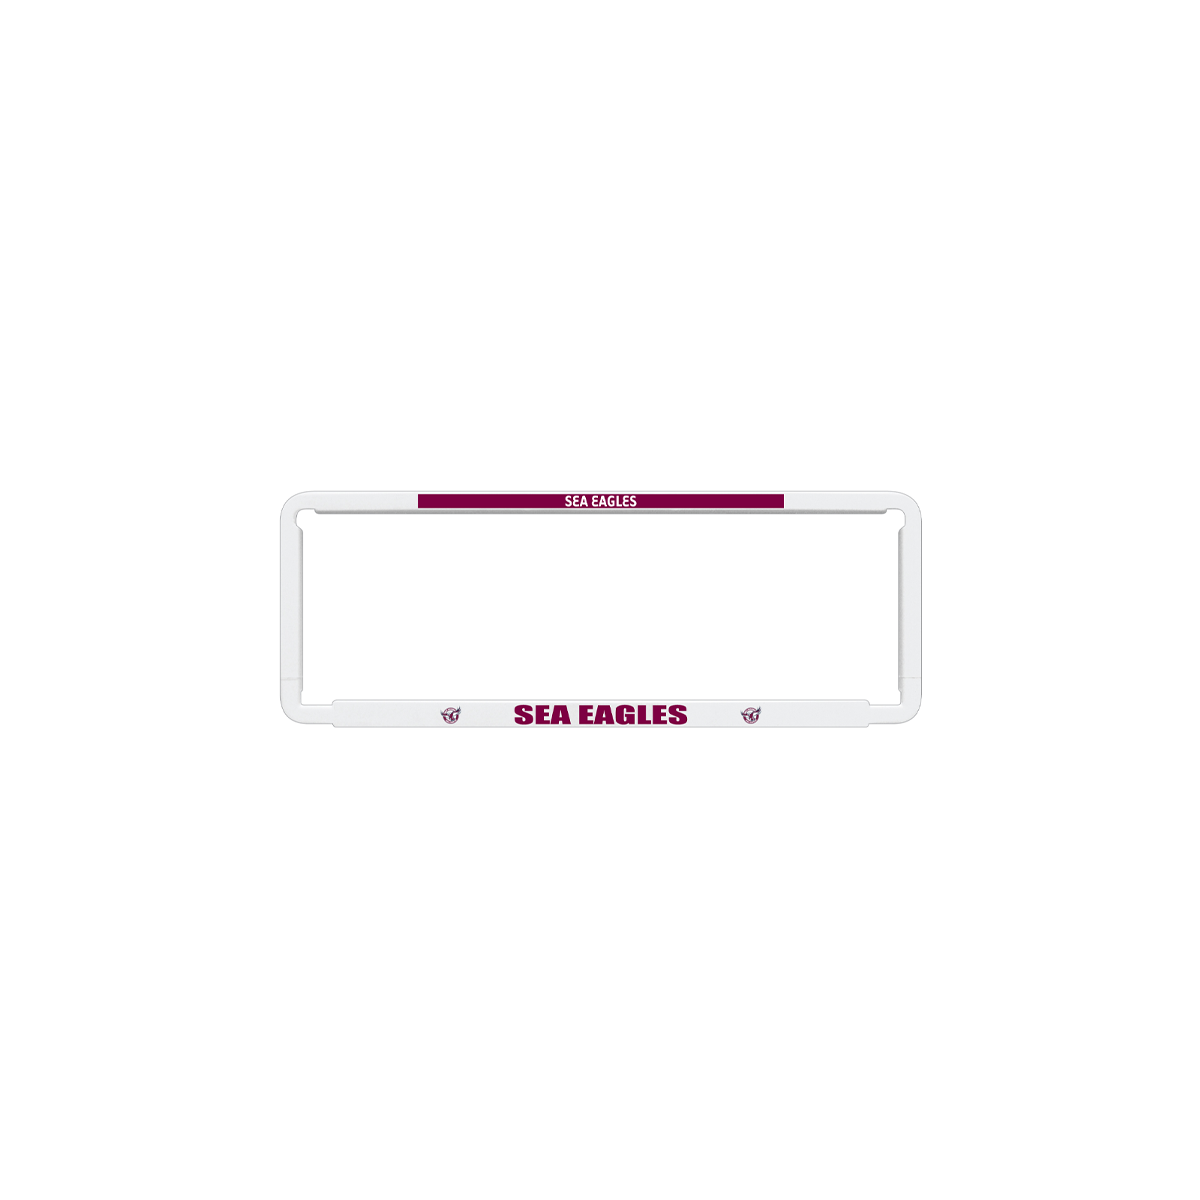 Manly Sea Eagles NRL Number Plate Cover